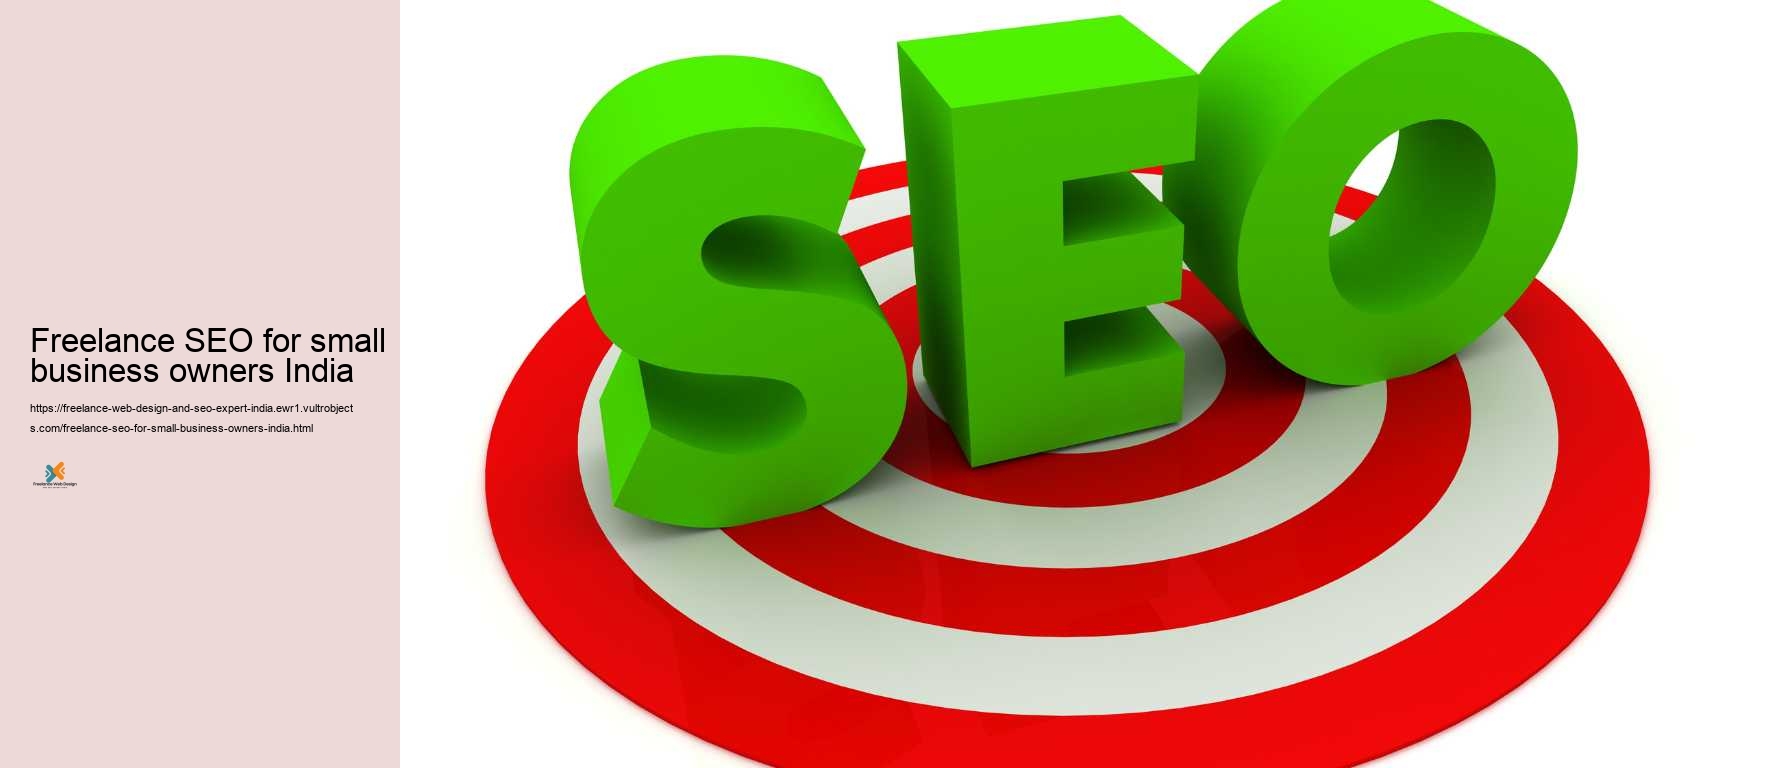 Freelance SEO for small business owners India